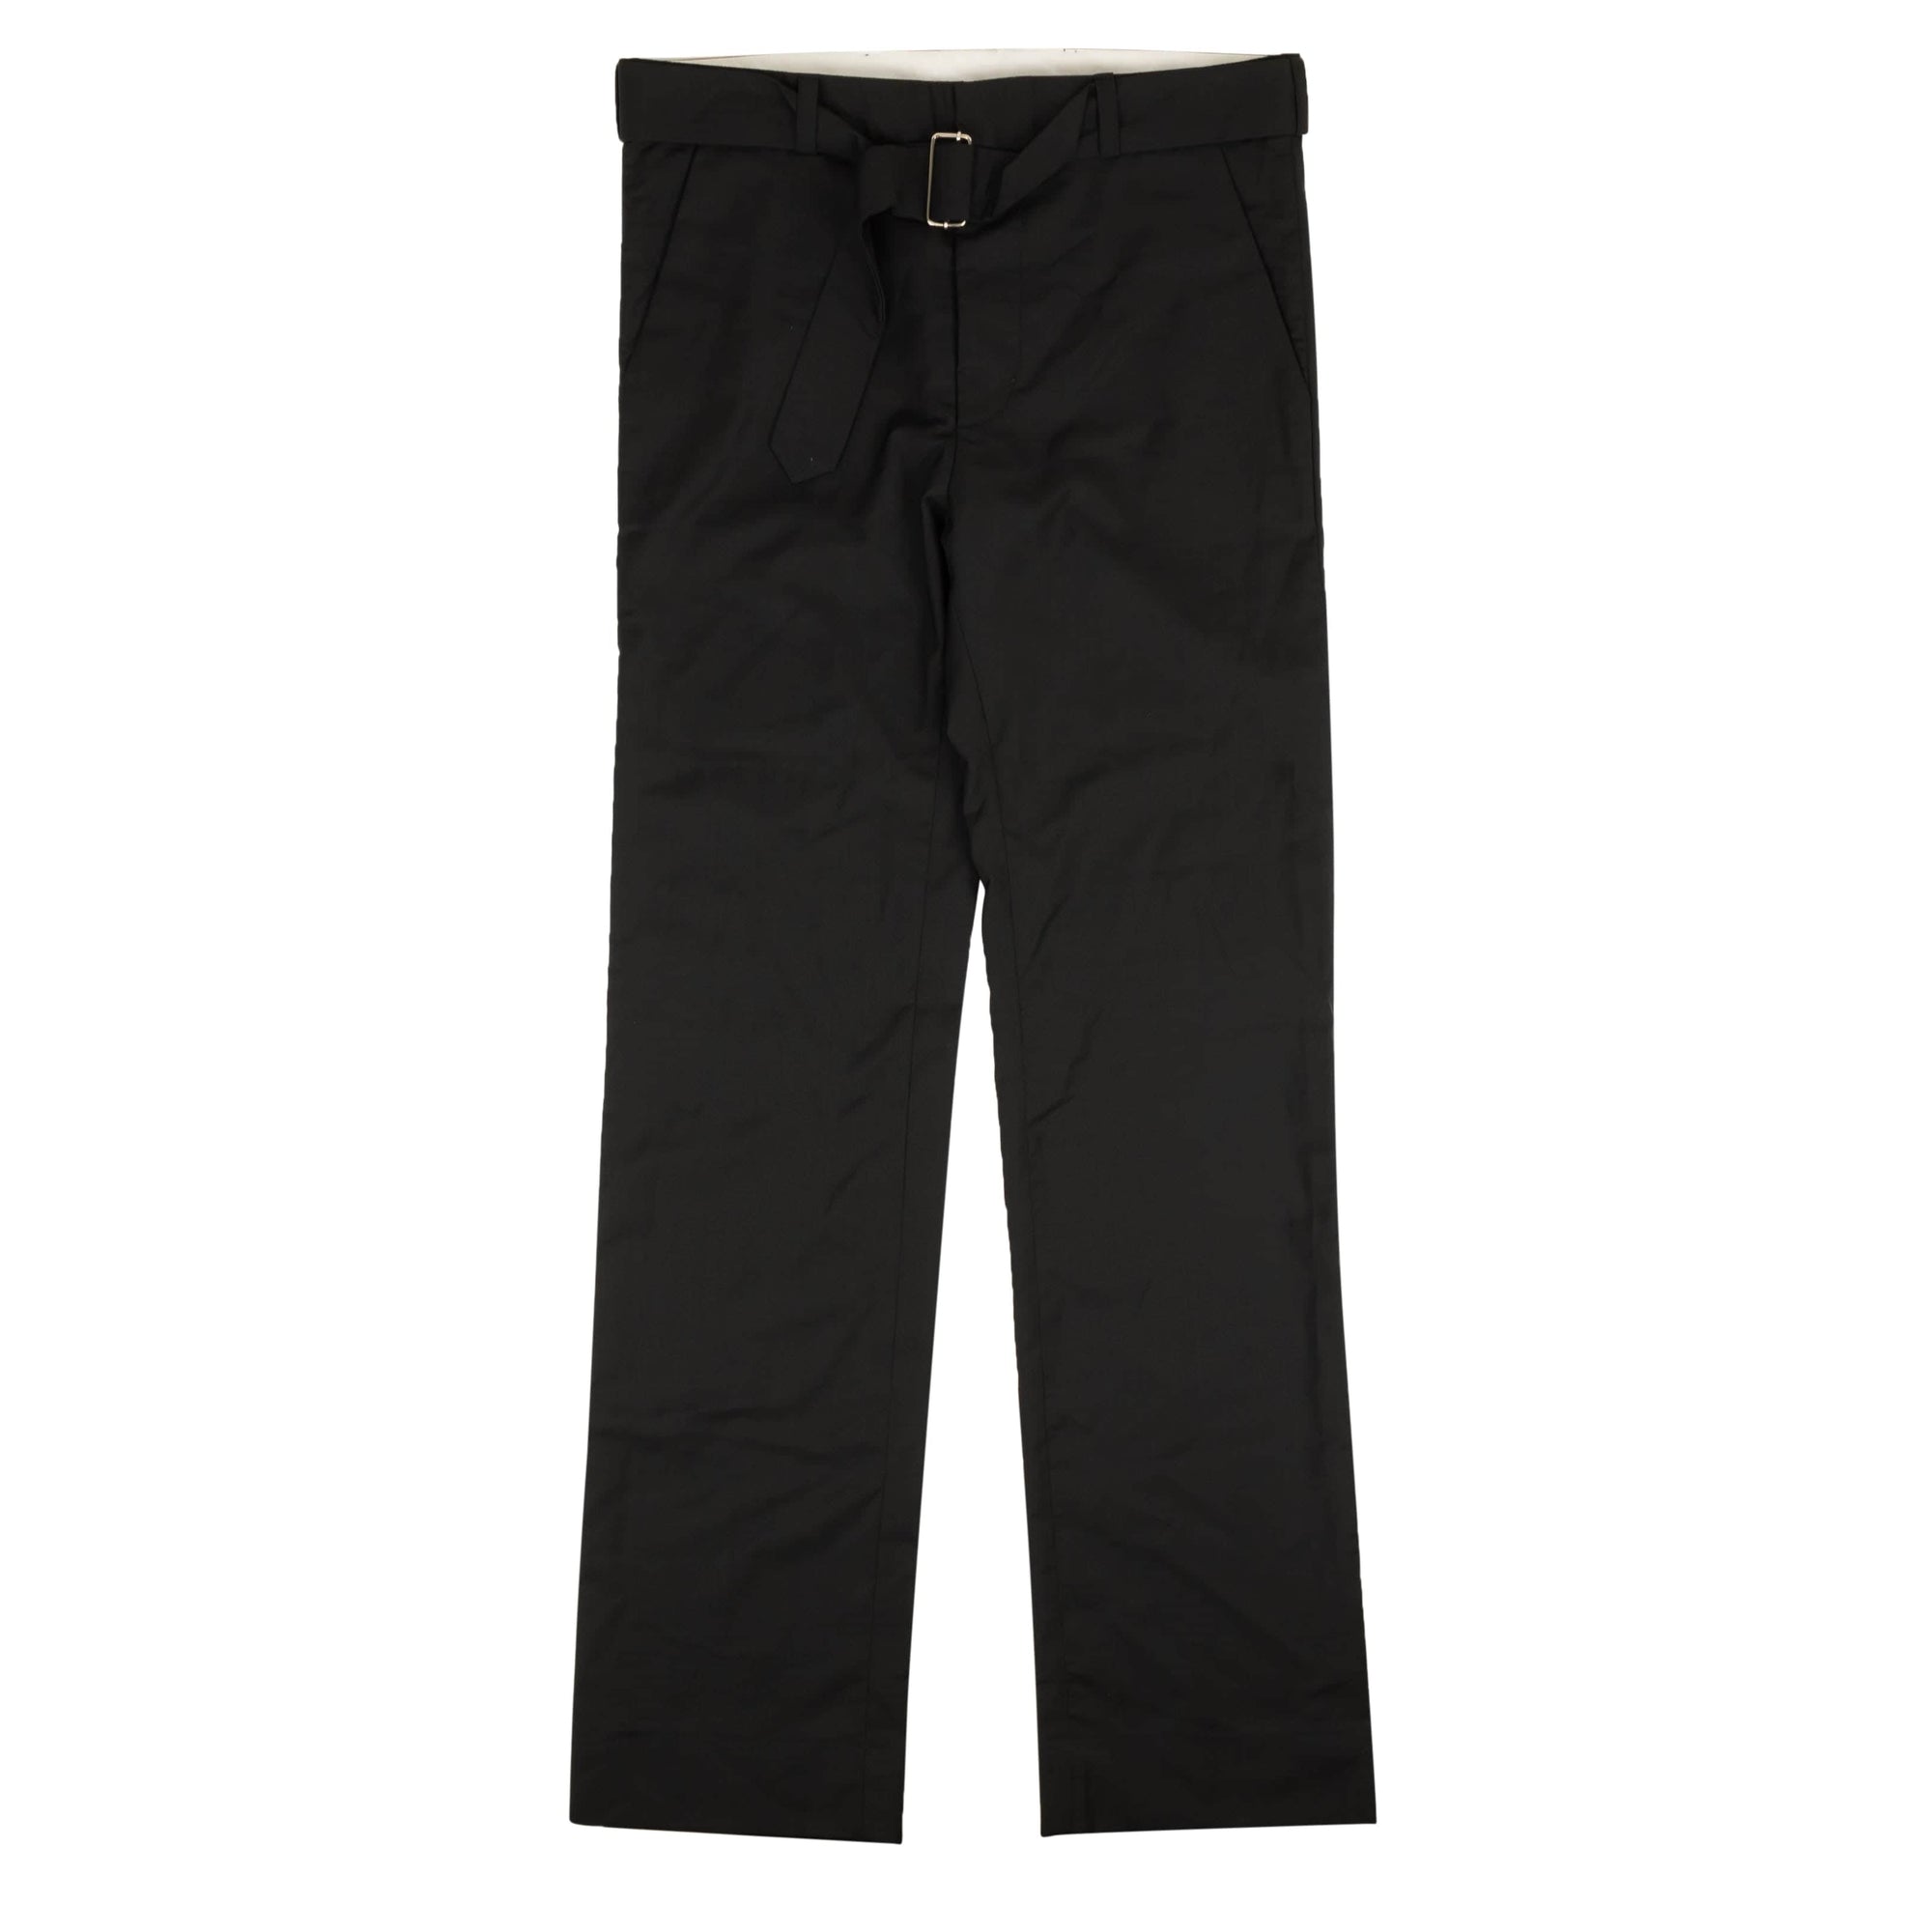 Stefan Cooke 250-500, channelenable-all, chicmi, couponcollection, gender-mens, main-clothing, mens-casual-pants, mens-shoes, MixedApparel, size-l, stefan-cooke L Black Tailored Trousers 95-SCE-1001/L 95-SCE-1001/L